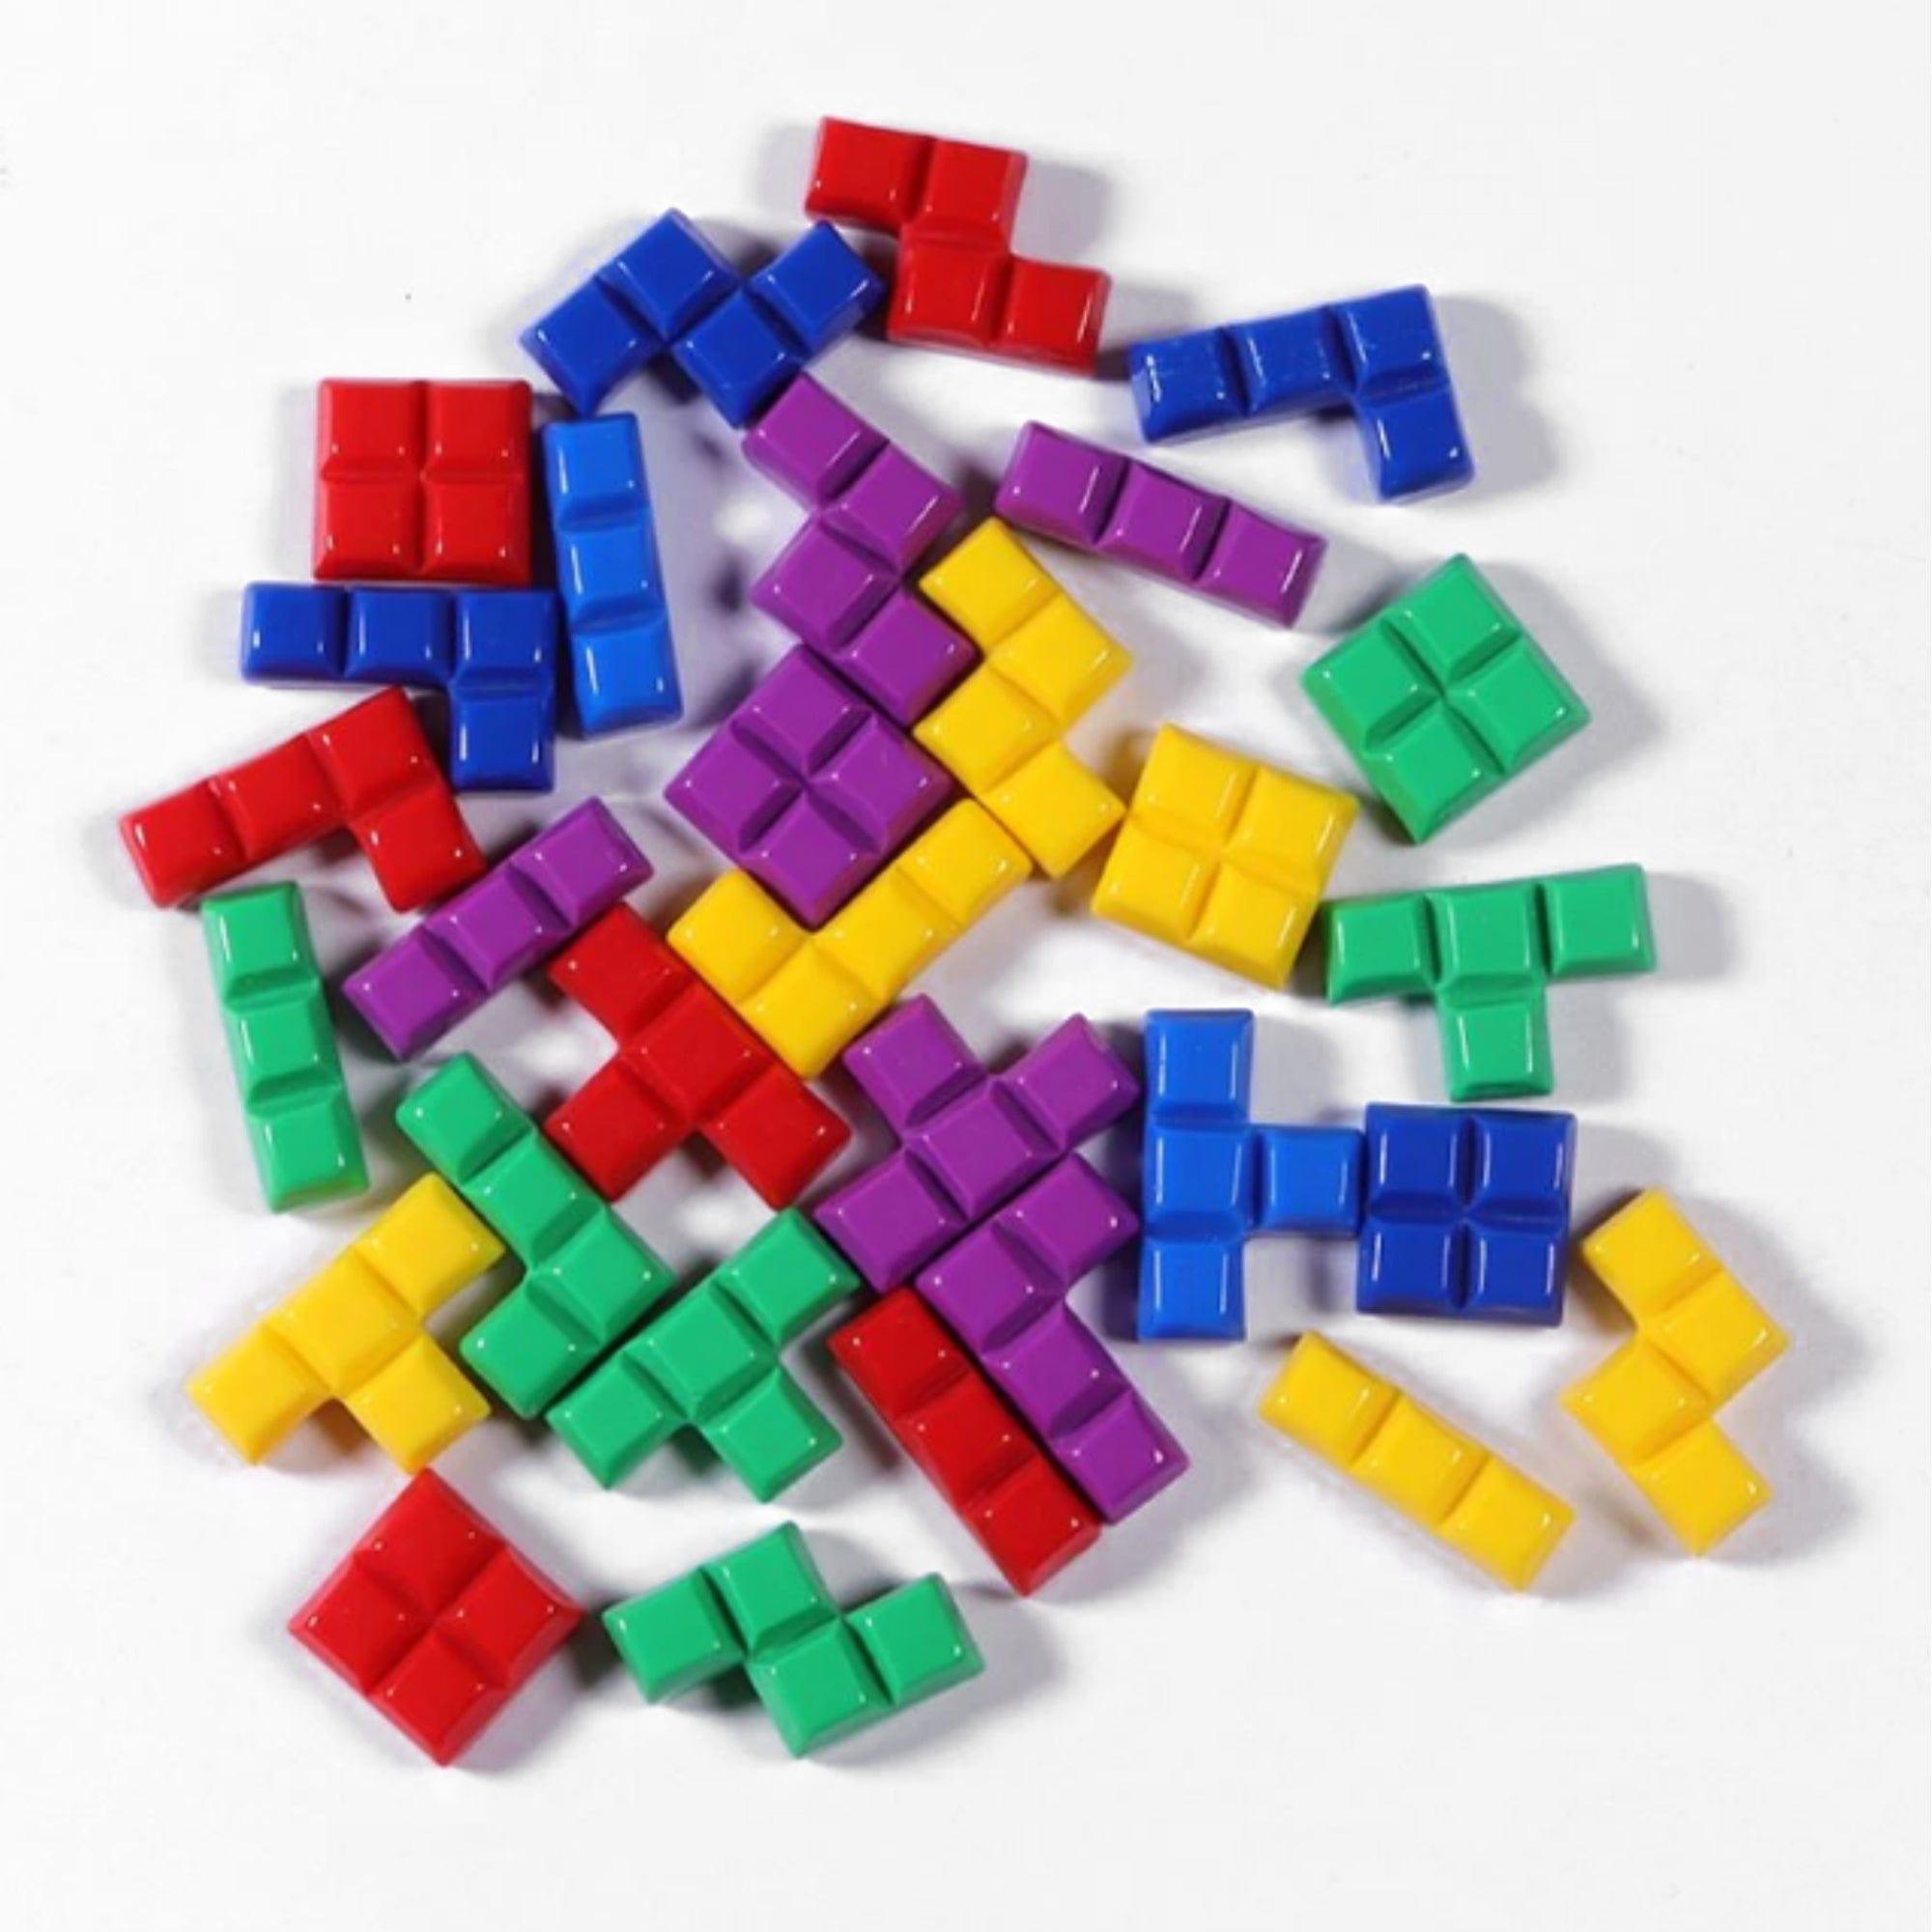 The Building Blocks Collection Blocks Flatback Scrapbook Buttons by SSC Designs - Pkg. of 17